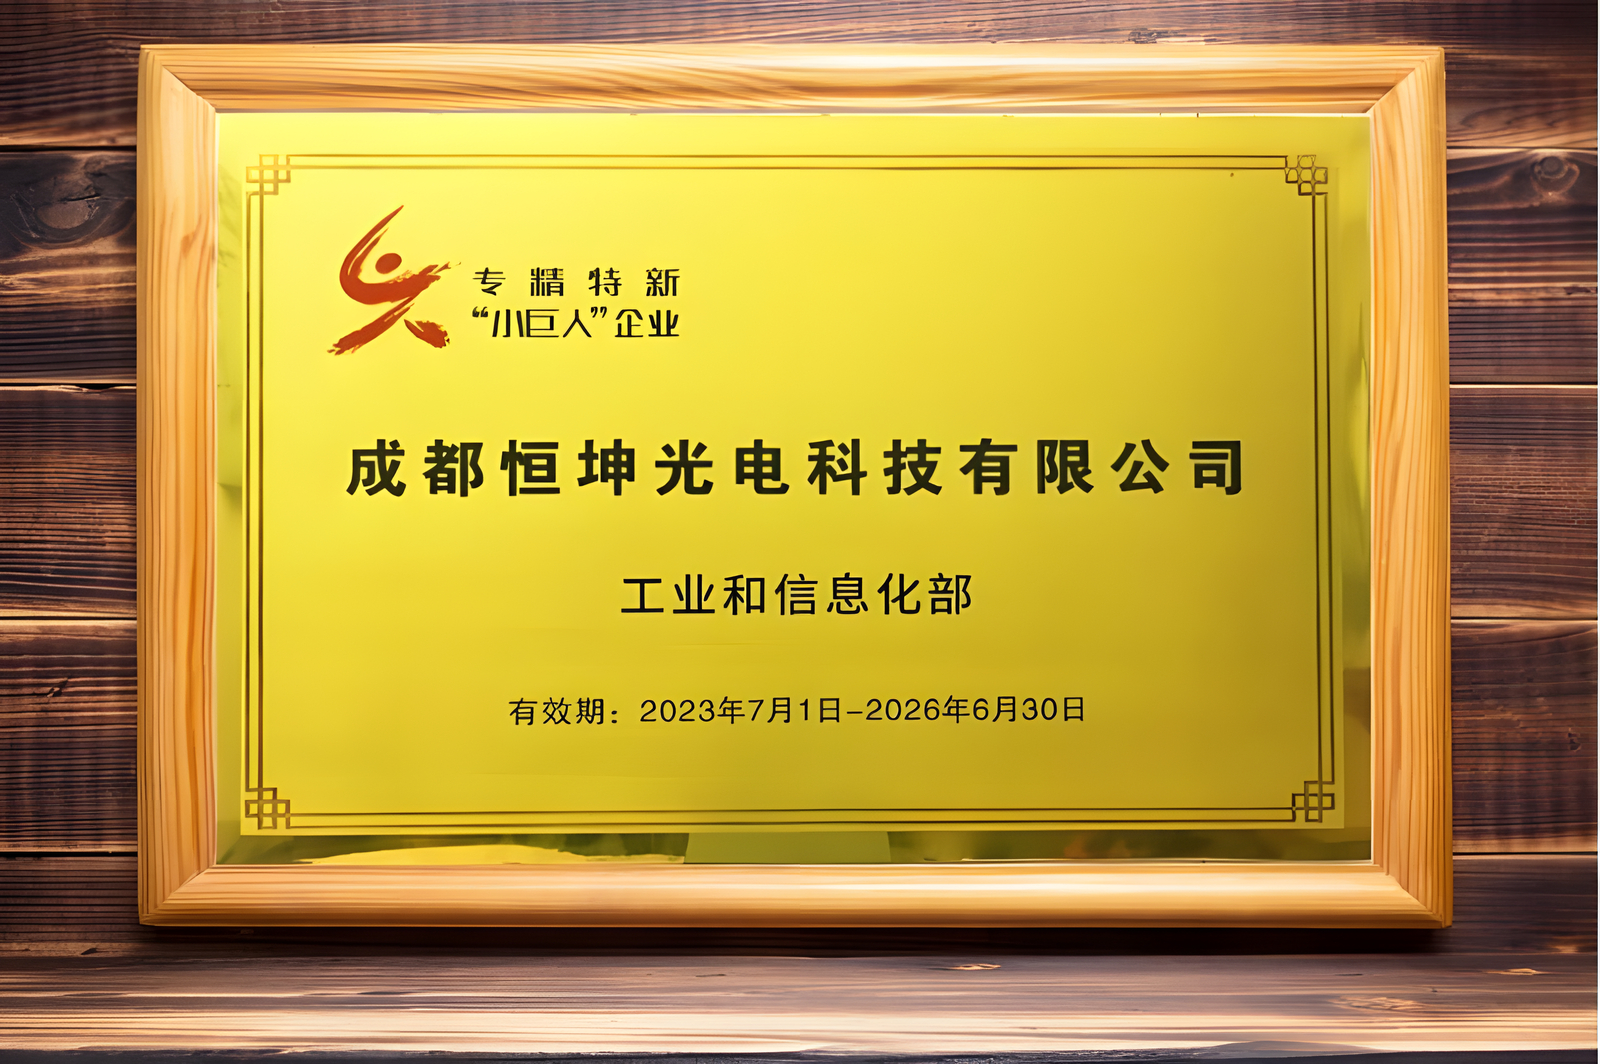 Chengdu HercuLux Photoelectric Technology Co., Ltd. was officially authorized as a national specialized, special and new small giant enterprise.